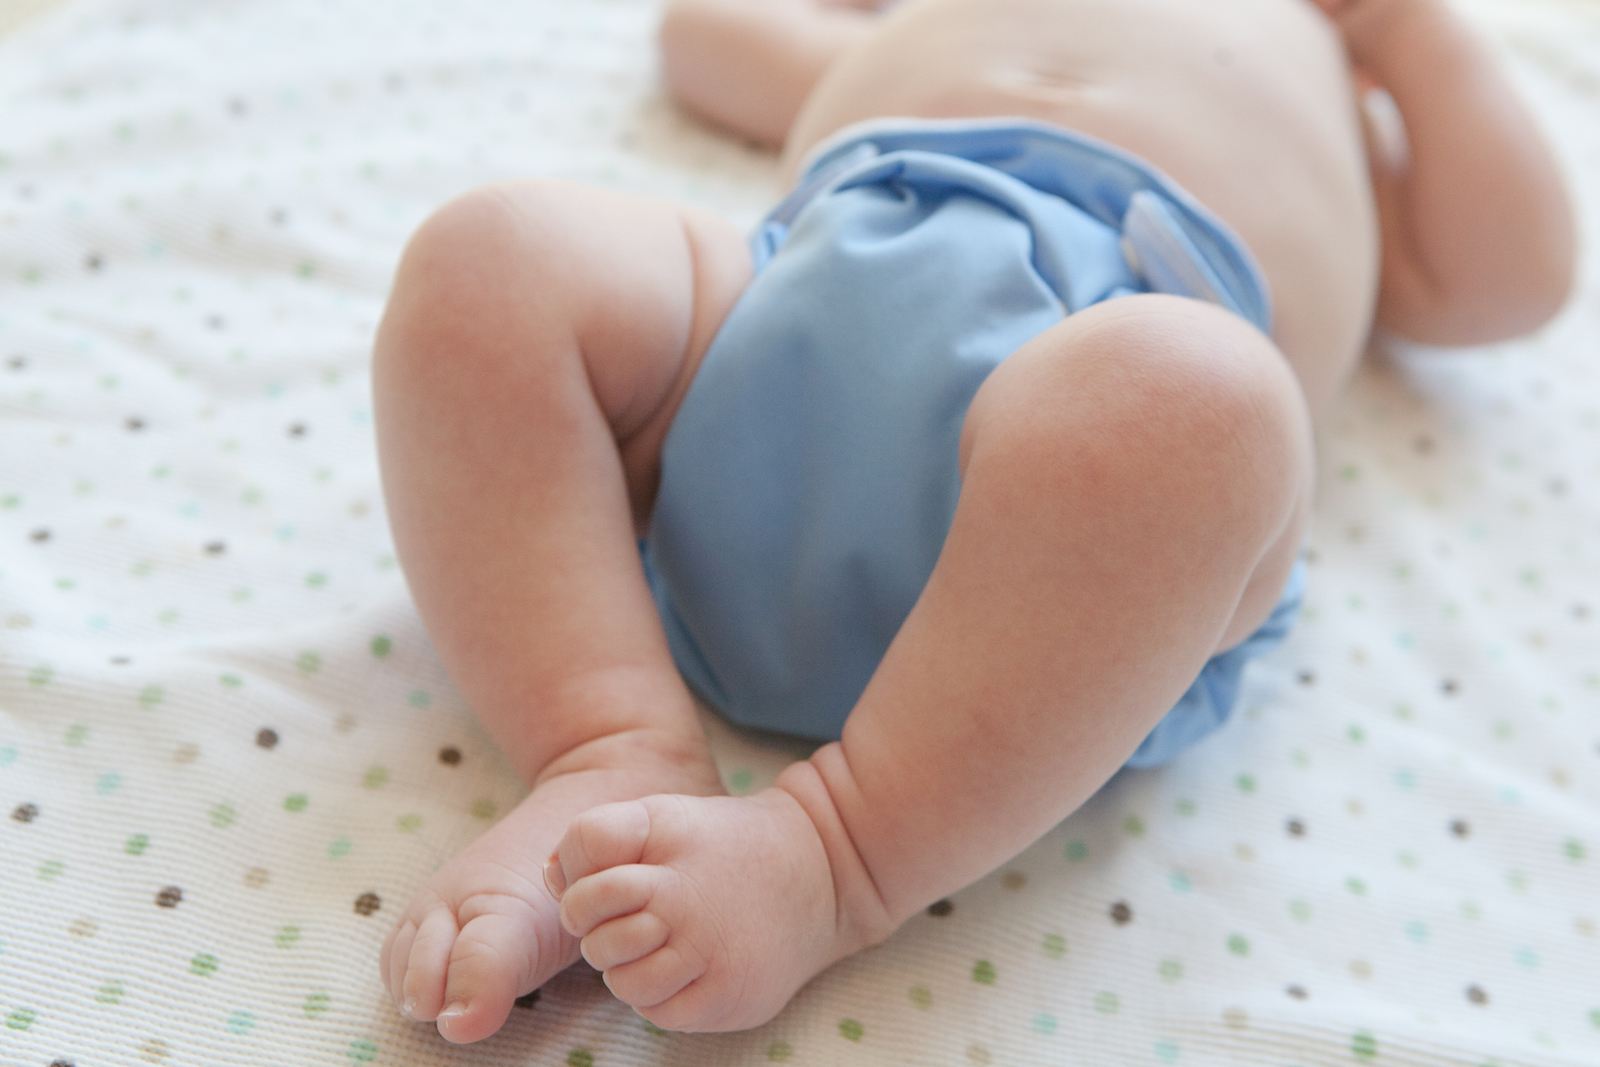 Cloth Diapers - The best baby diapers, how to clean reusable diapers and where to buy